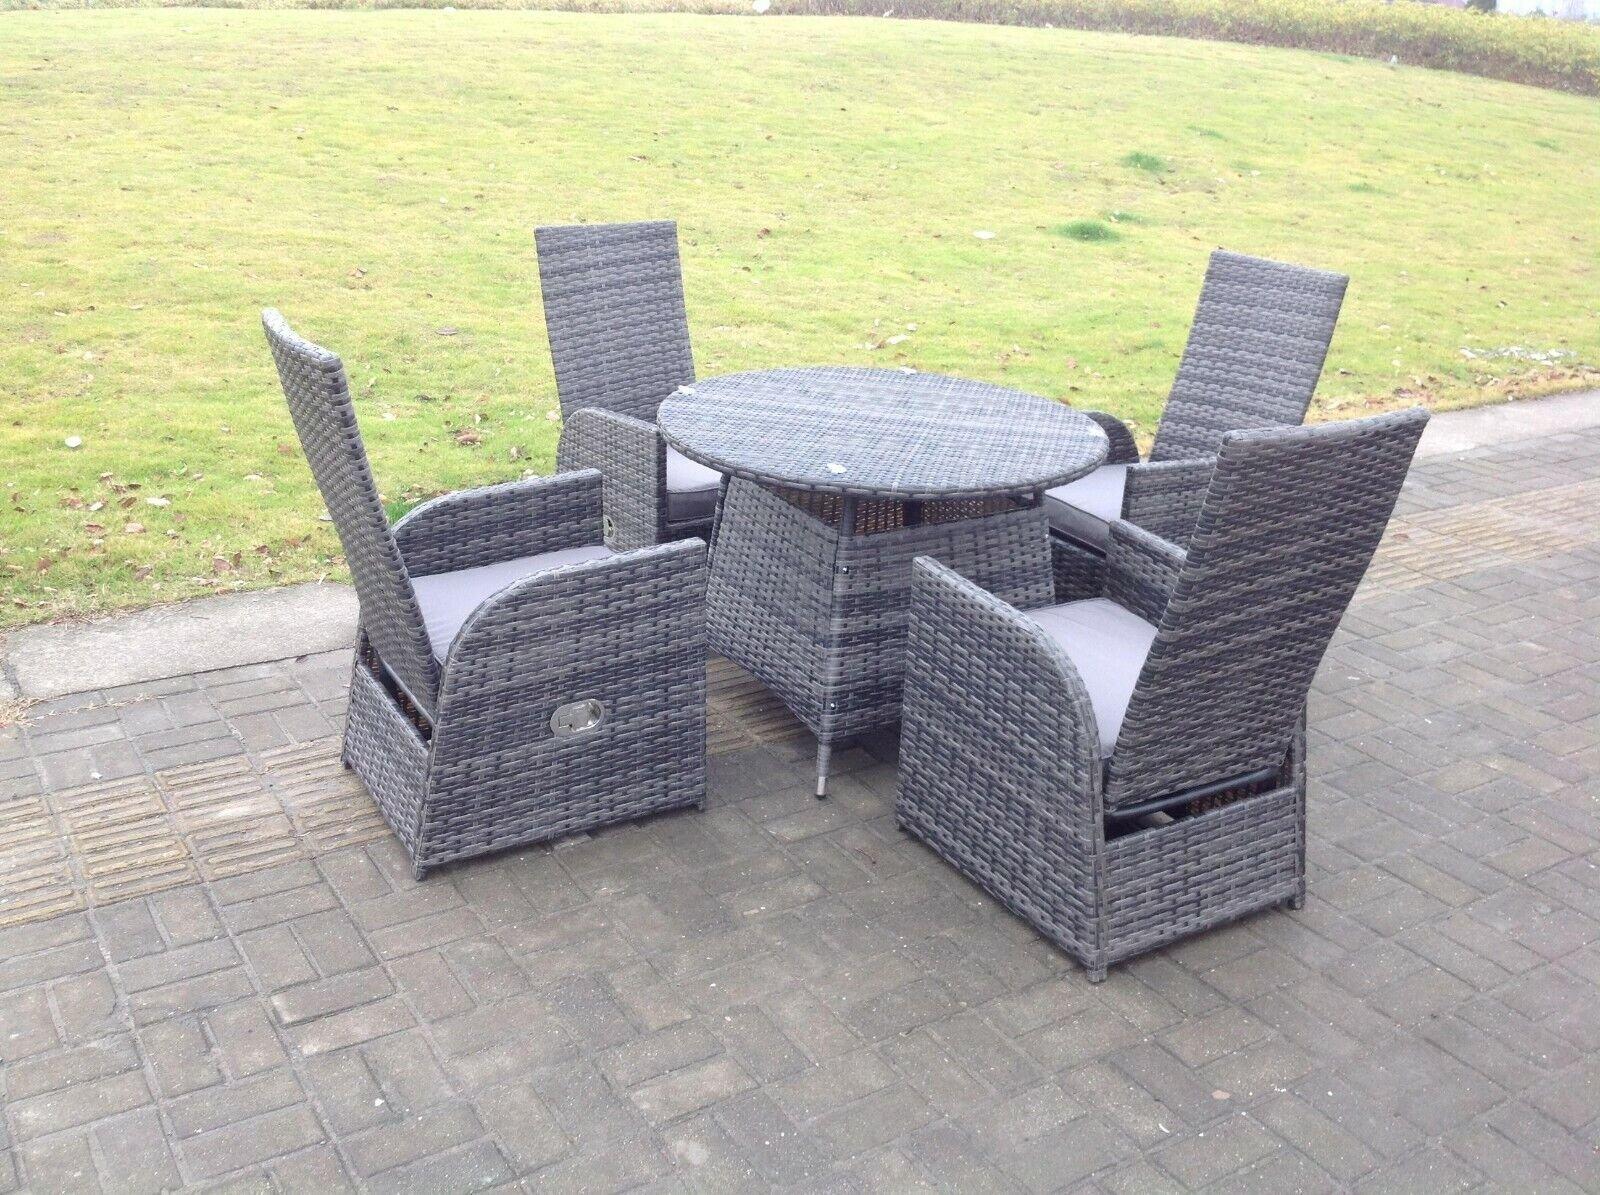 Outdoor Wicker Rattan Garden Furniture Reclining Chair And Table Dining Sets 4 Seater Round Table